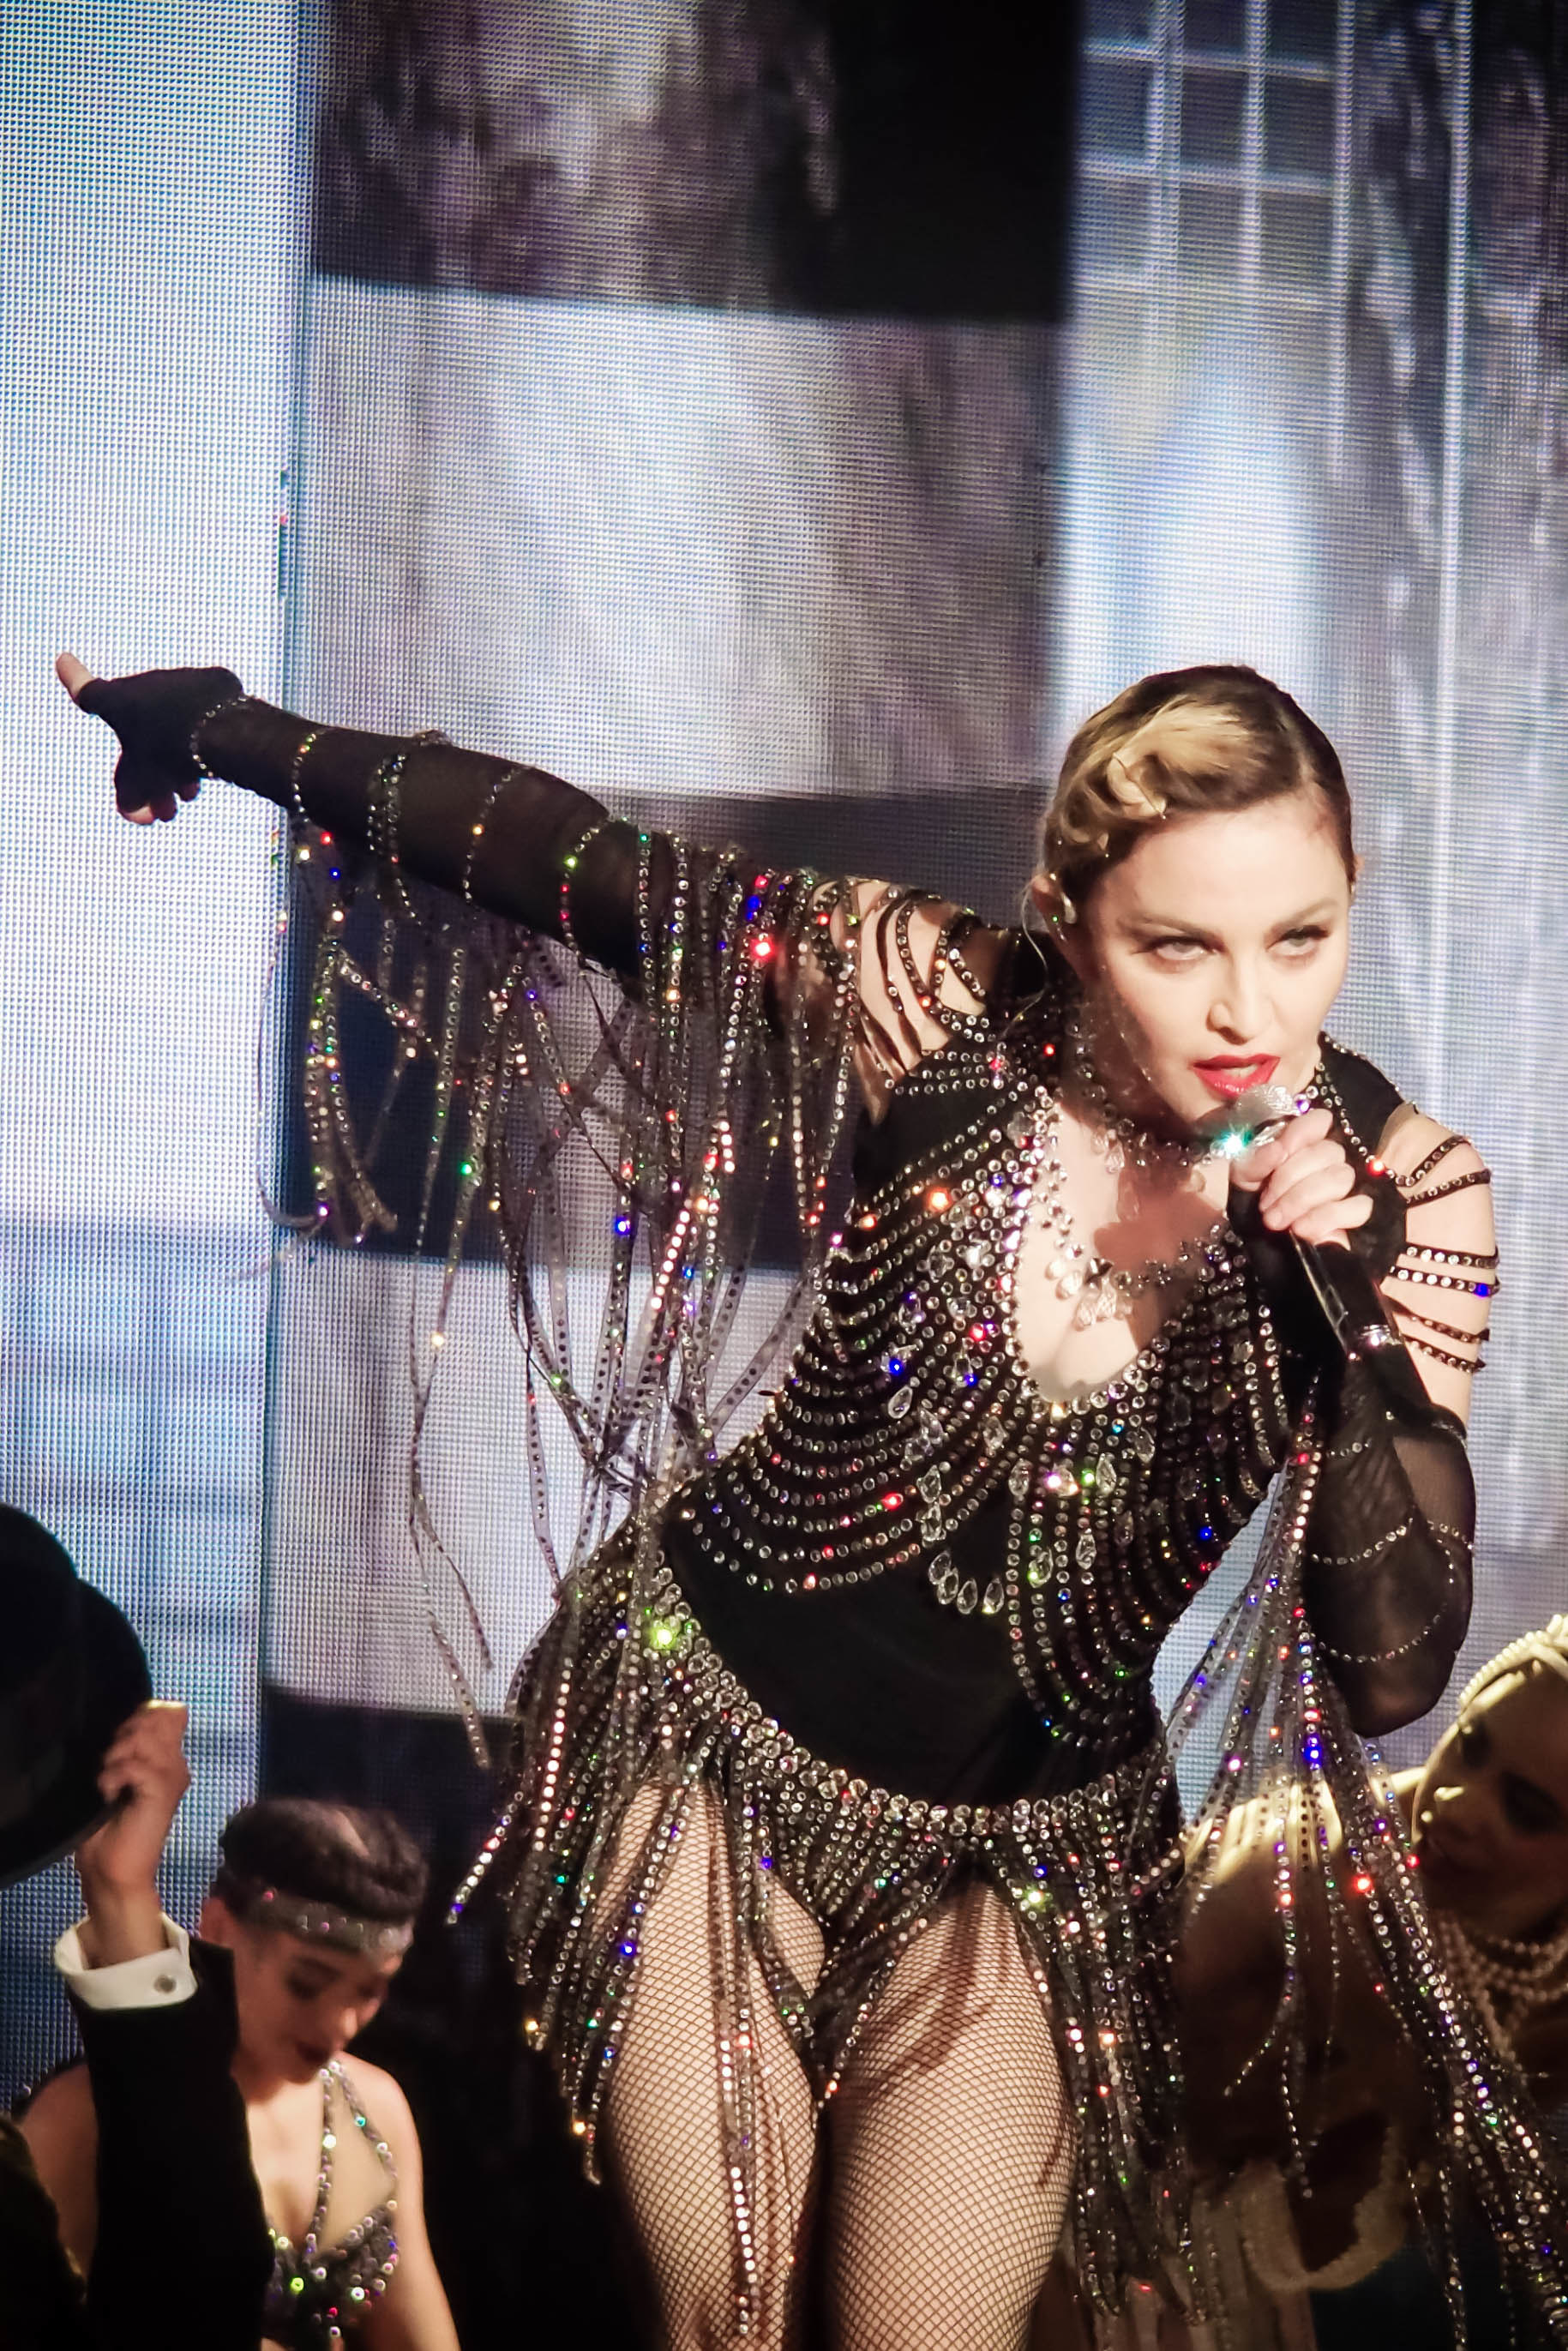 Madonna performing during a concert